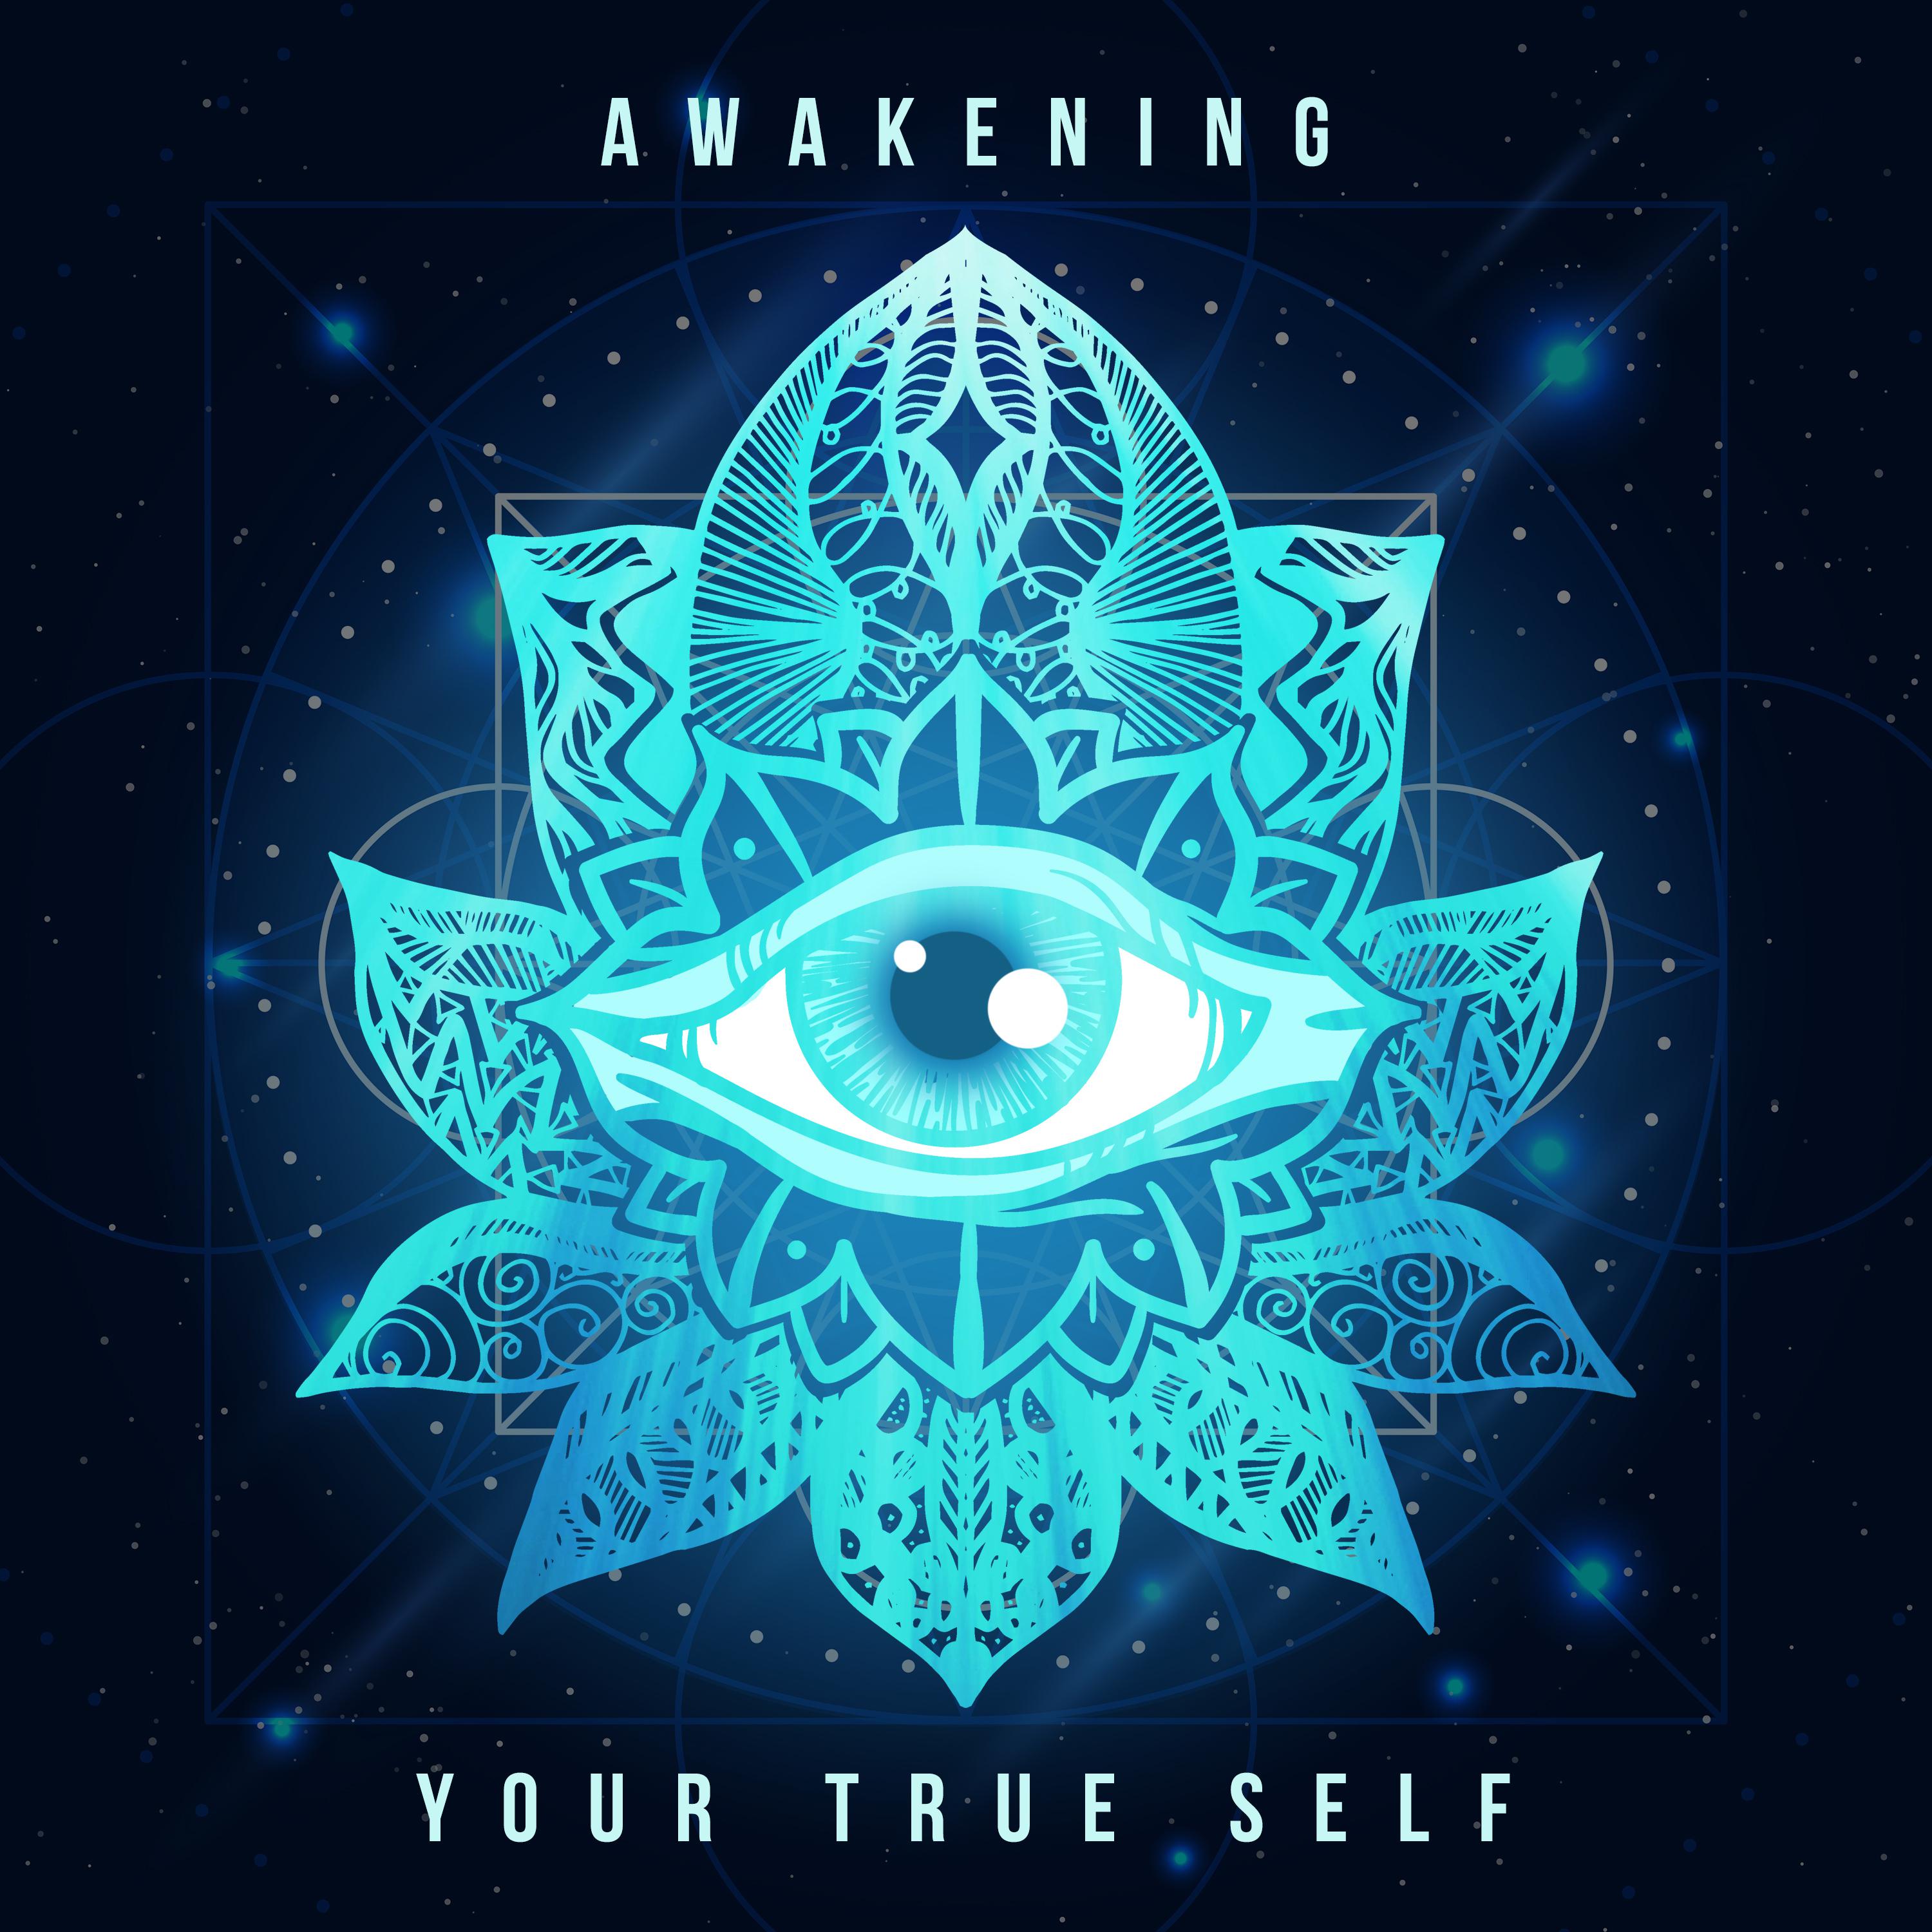 Awakening Your True Self 864 Hz  256 Hz, Healing Frequencies to Stimulate Your Spirit, Colorful Energy  7 Chakra Layers